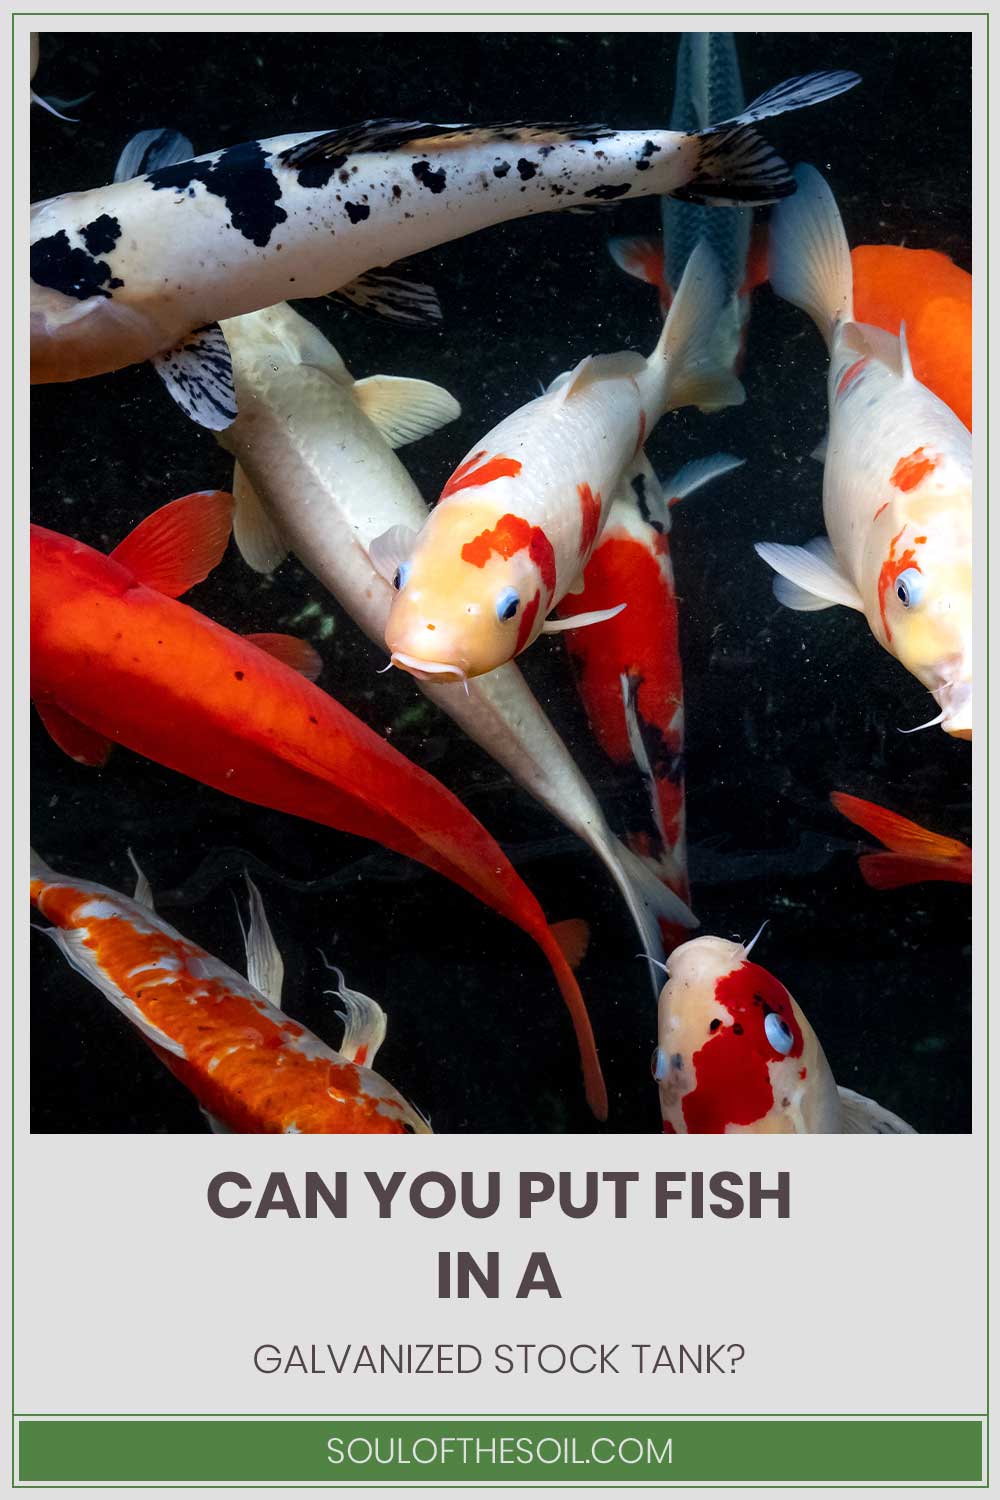 Some aquarium fishes - Can You Put in In A Galvanized Stock Tank?